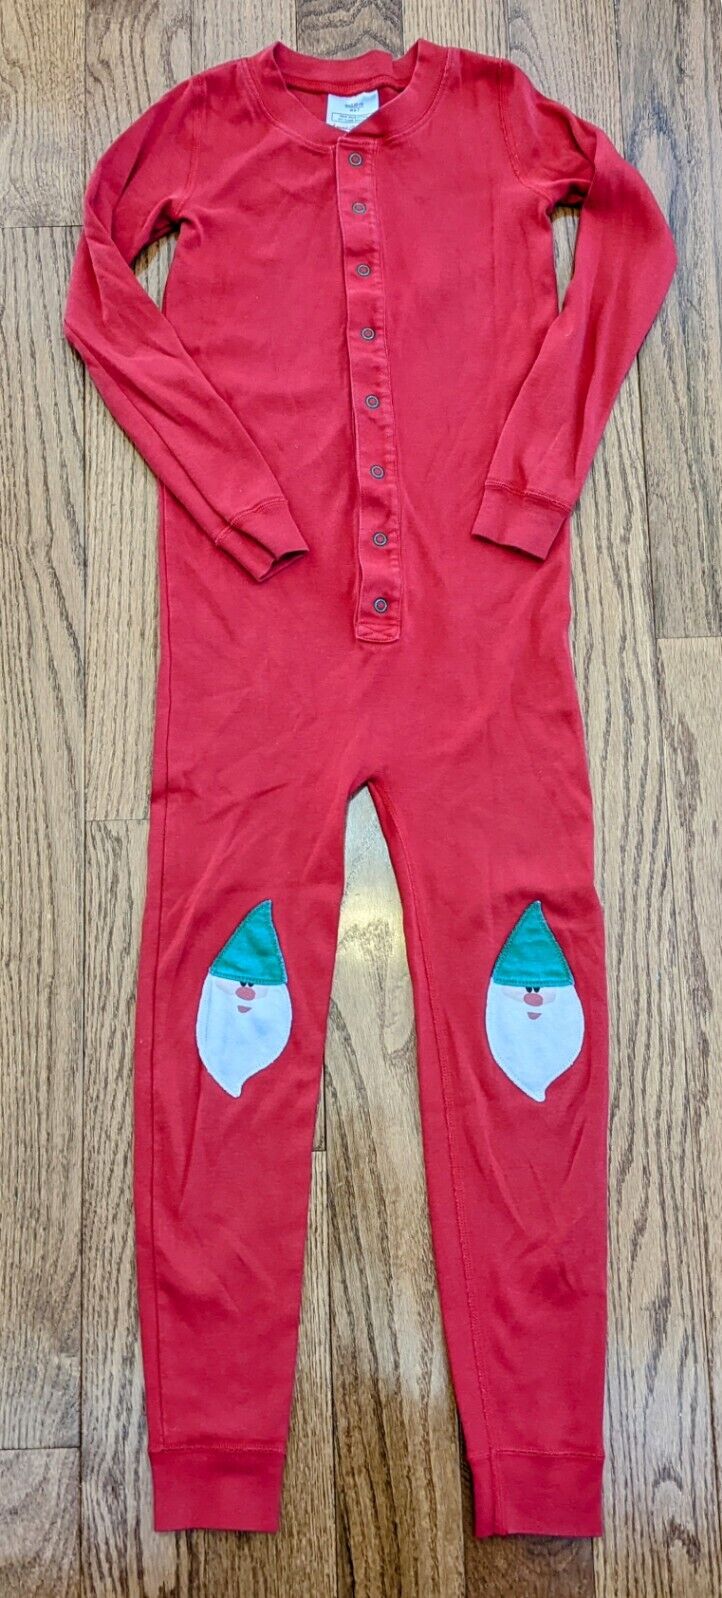 Hanna Andersson Red One Piece Pajamas Size 120 Us 6-7 Gnome Holiday Christmas